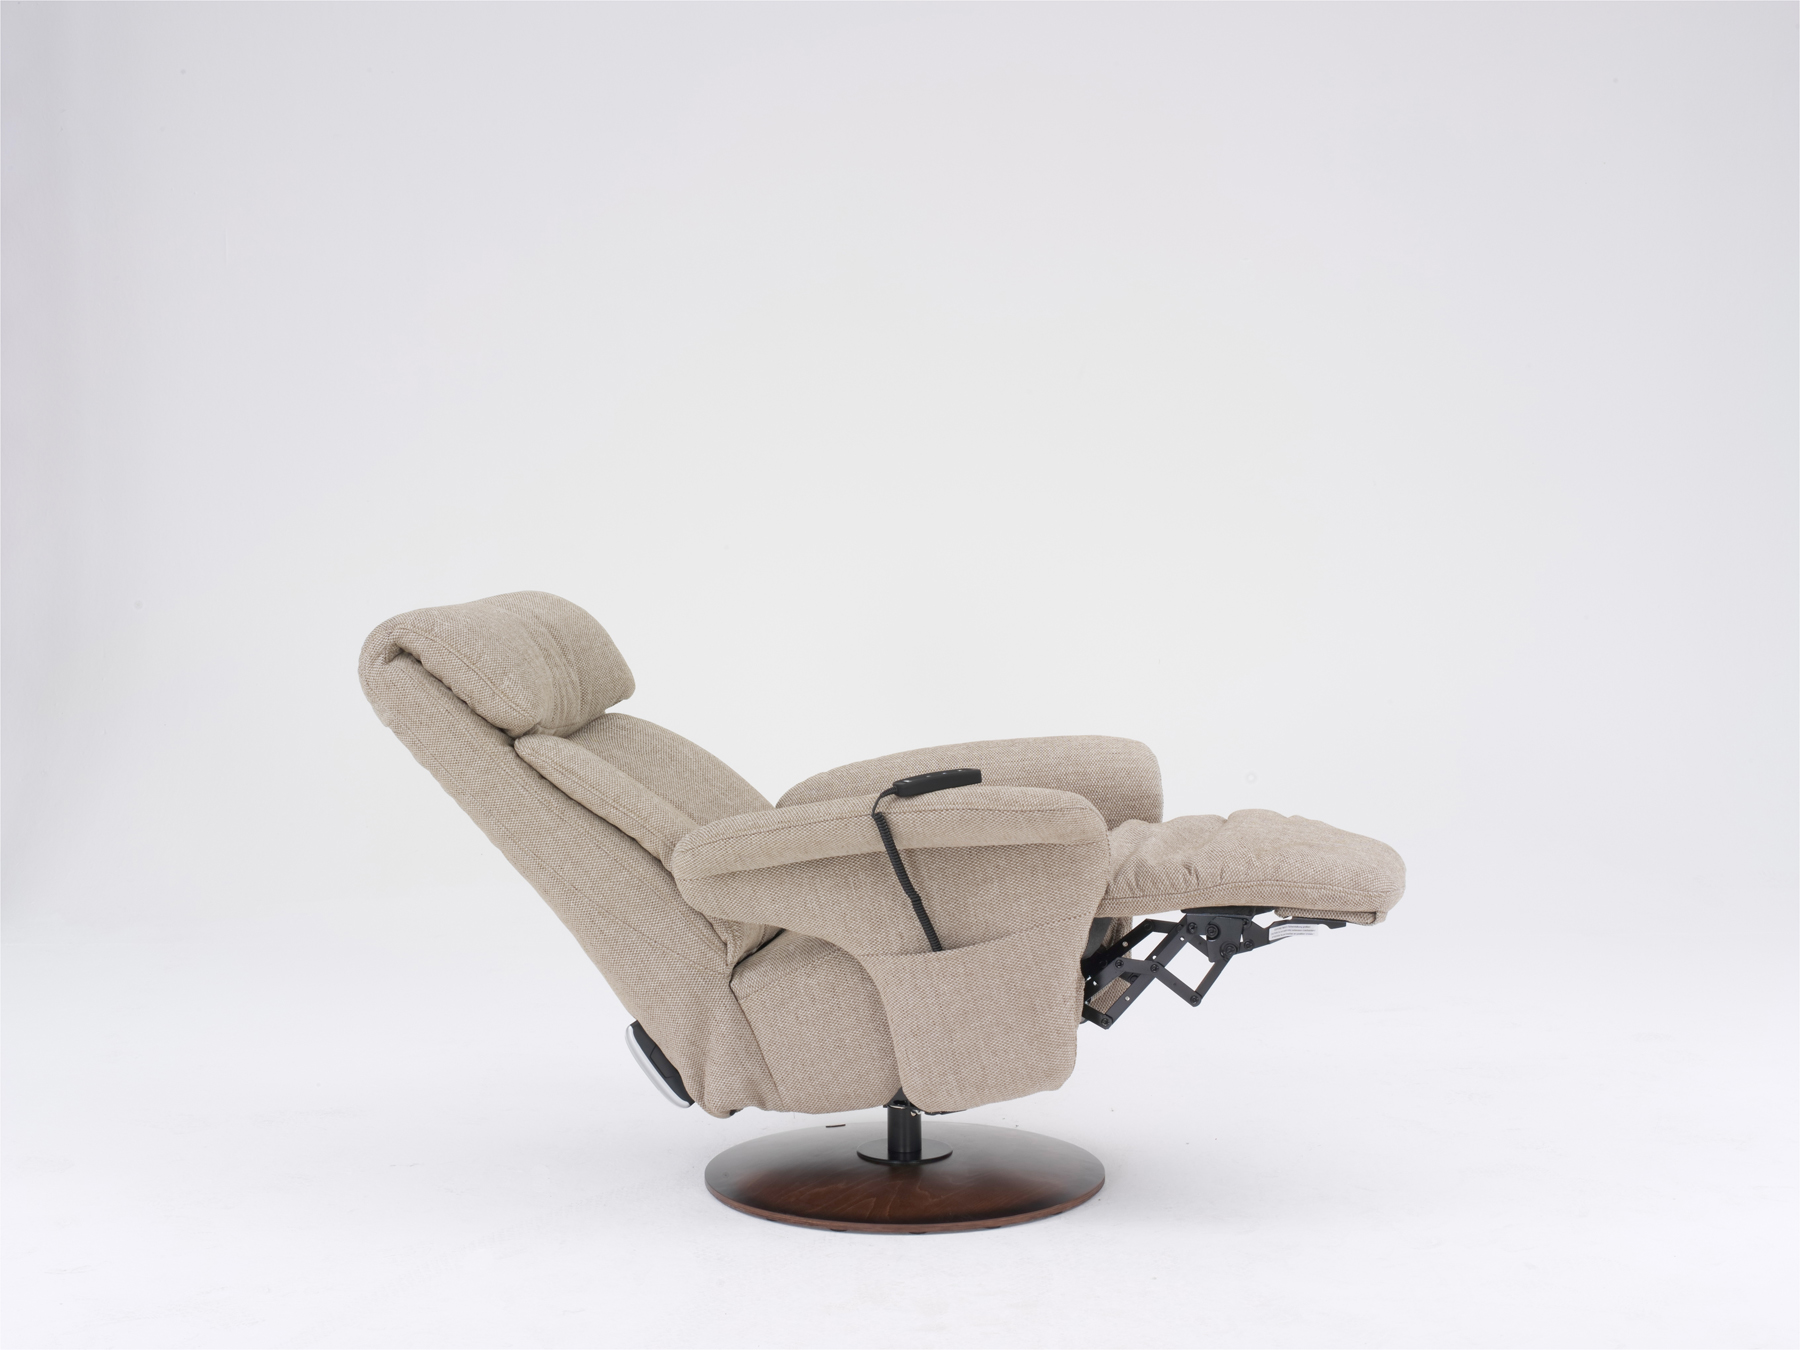 HIMOLLA SINARTRA FABRIC CHAIR FULLY RECLINED